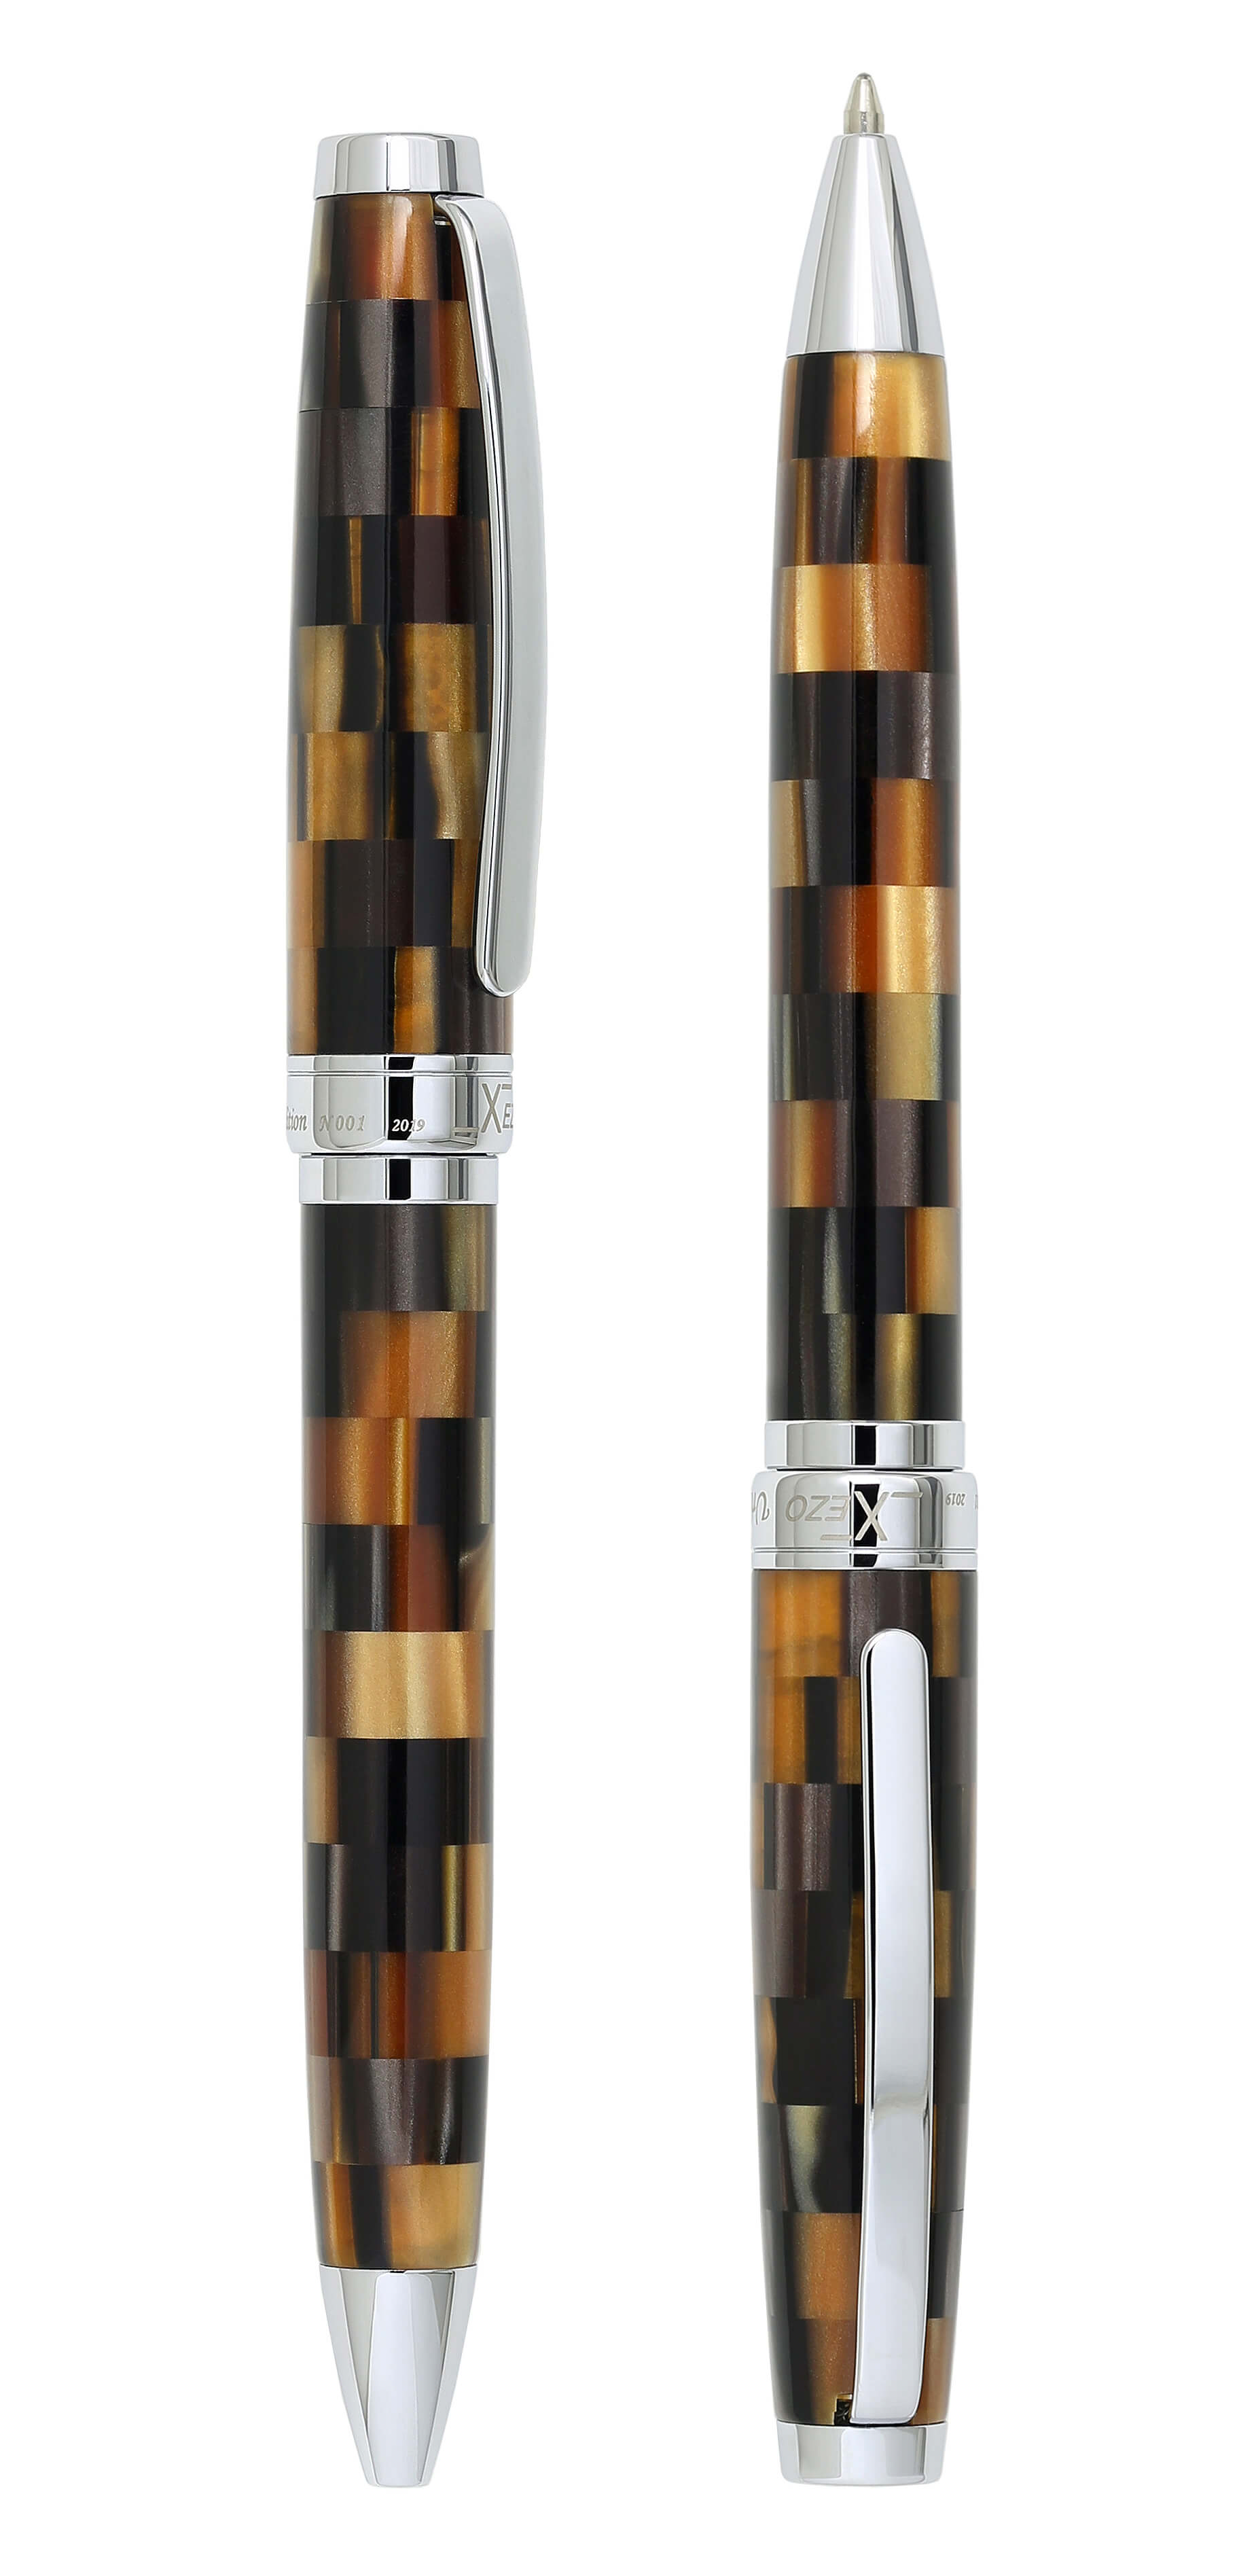 Xezo – Comparison between twisted-cap position and neutral-cap position of two Urbanite Brown B ballpoint pens